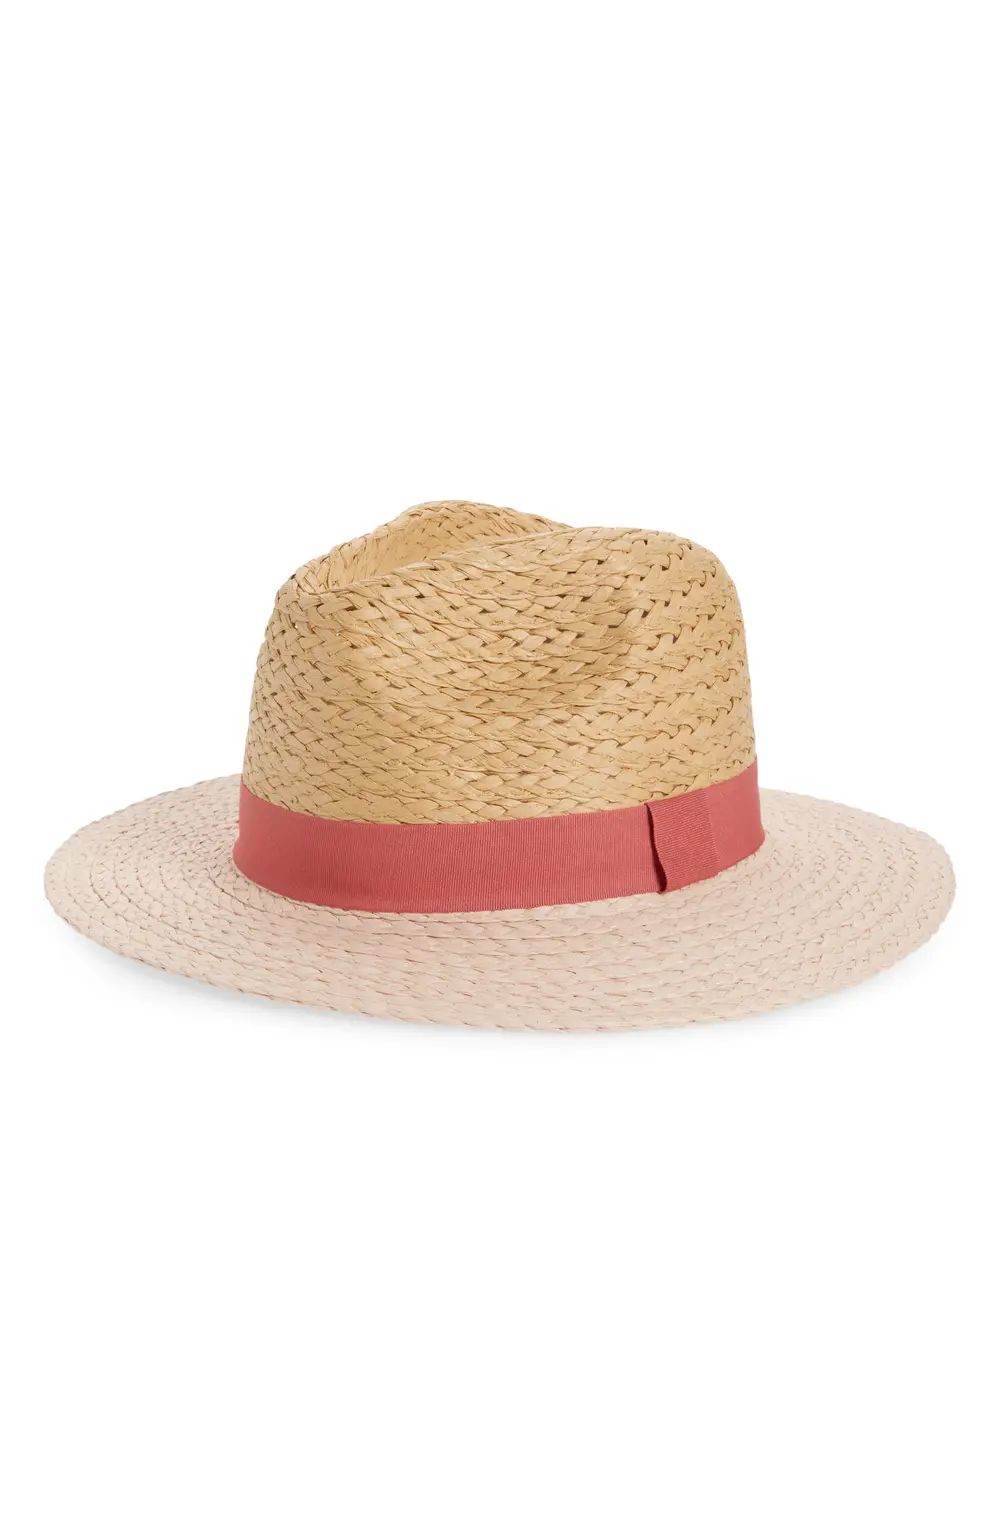 Nordstrom Braided Two-Tone Paper Straw Panama Hat in Pink Combo at Nordstrom | Nordstrom Canada